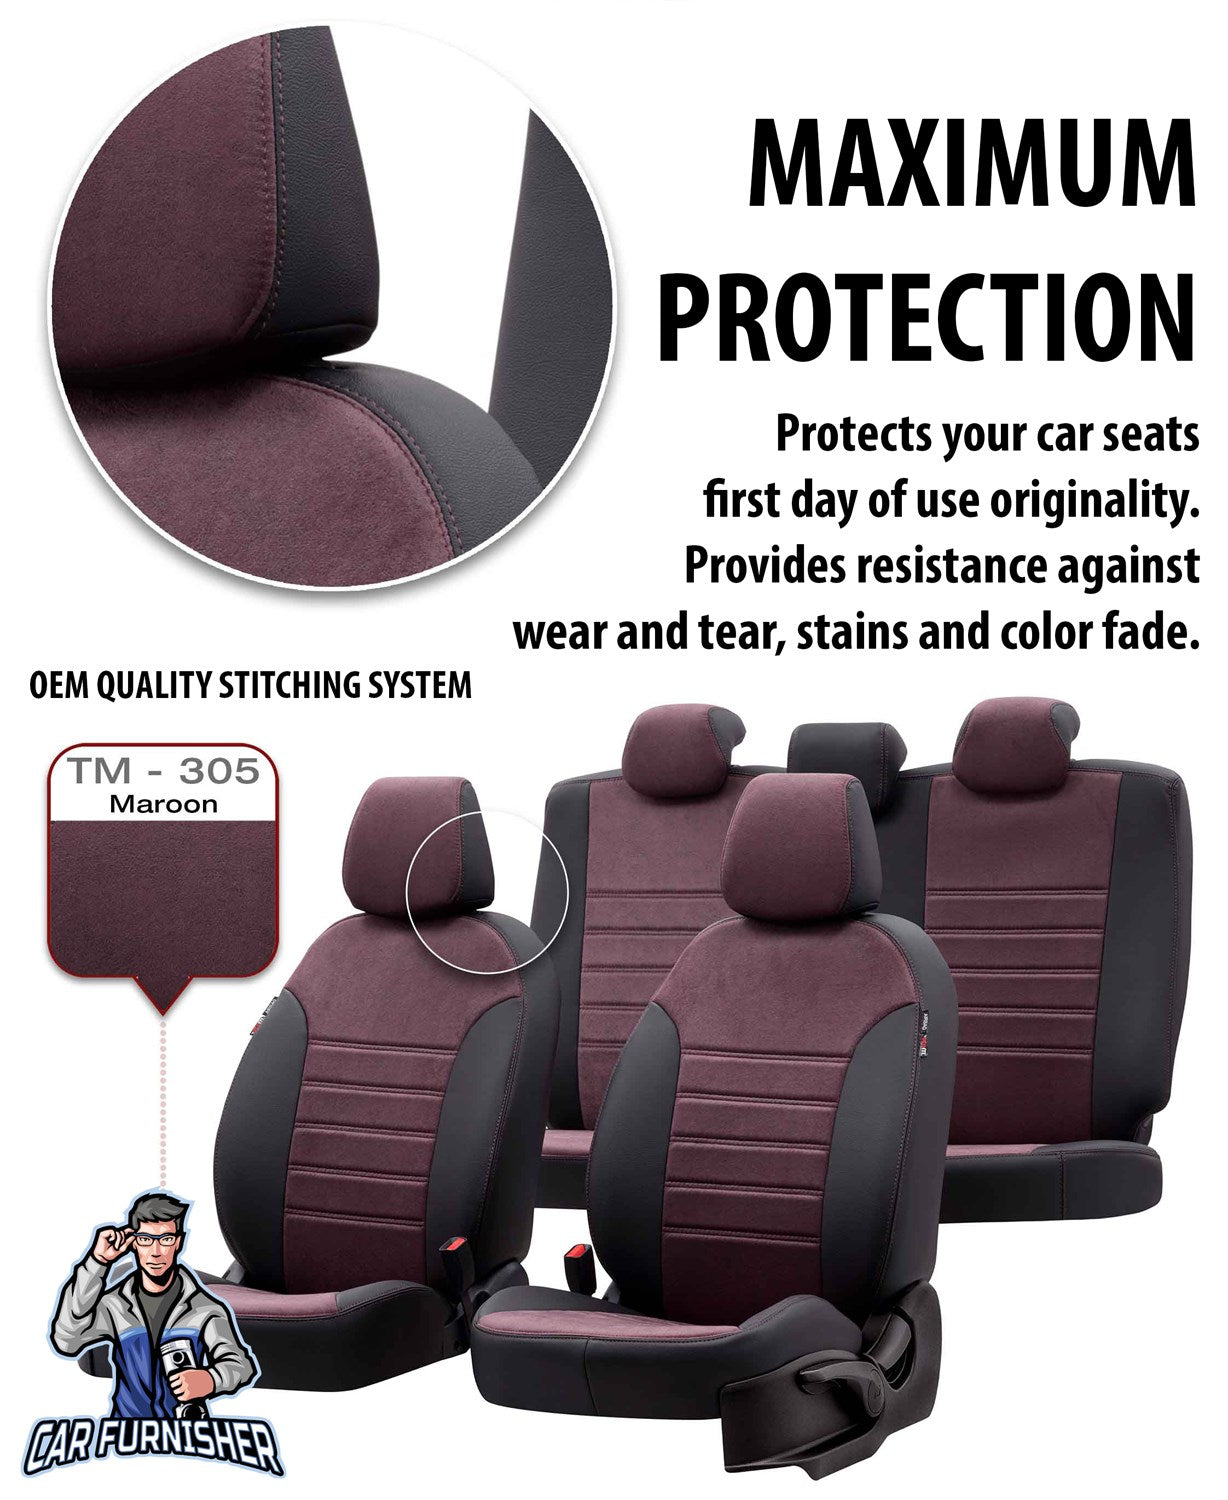 Volkswagen T-Roc Seat Cover Milano Suede Design Smoked Leather & Suede Fabric